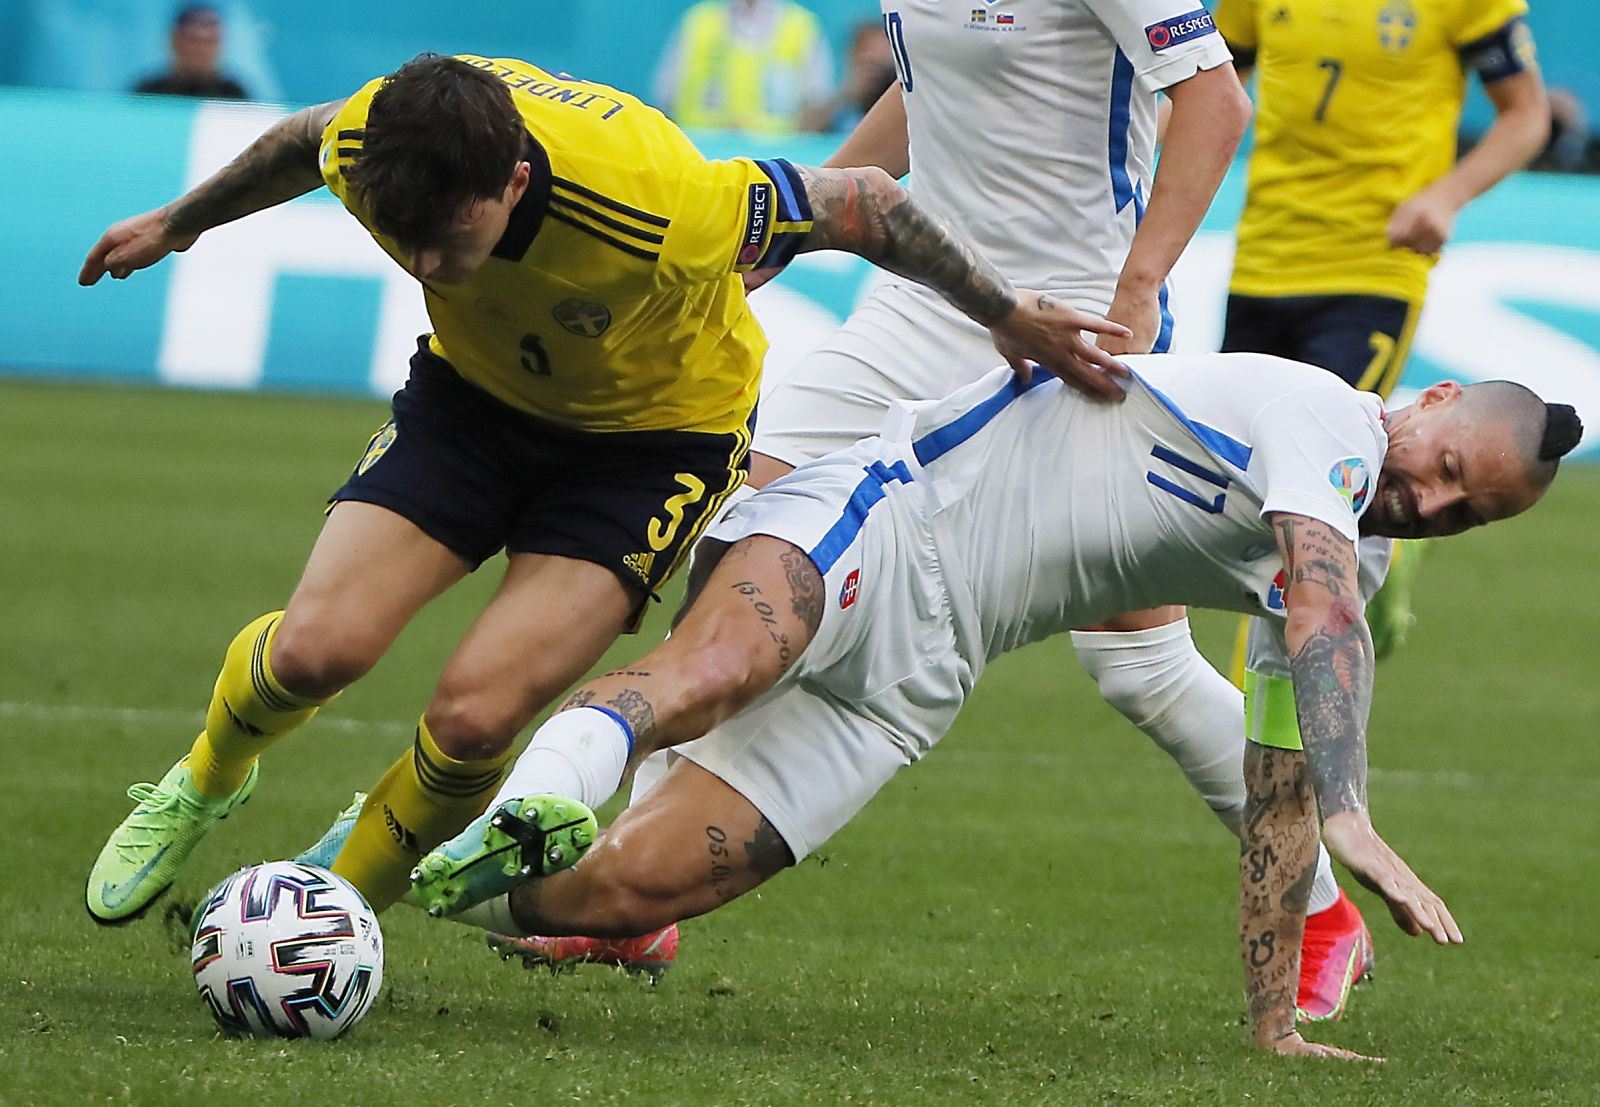 epa09282688 Victor Lindelof (L) of Sweden in action against Marek Hamsik of Slovakia during the UEFA EURO 2020 group E preliminary round soccer match between Sweden and Slovakia in St.Petersburg, Russia, 18 June 2021.  EPA/Maxim Shemetov / POOL (RESTRICTIONS: For editorial news reporting purposes only. Images must appear as still images and must not emulate match action video footage. Photographs published in online publications shall have an interval of at least 20 seconds between the posting.)